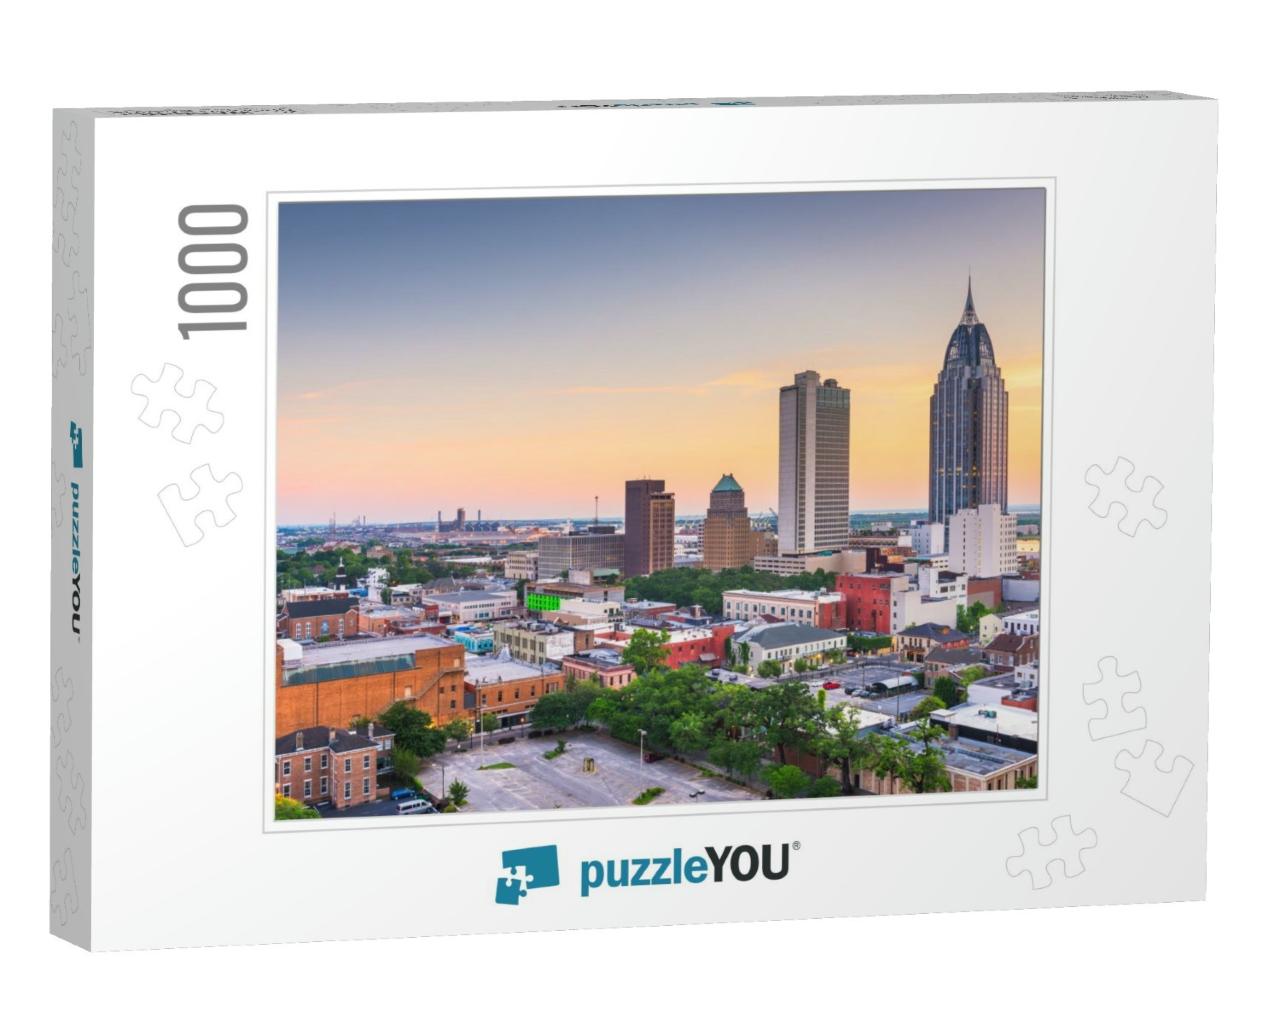 Mobile, Alabama, USA Downtown Skyline At Dusk... Jigsaw Puzzle with 1000 pieces